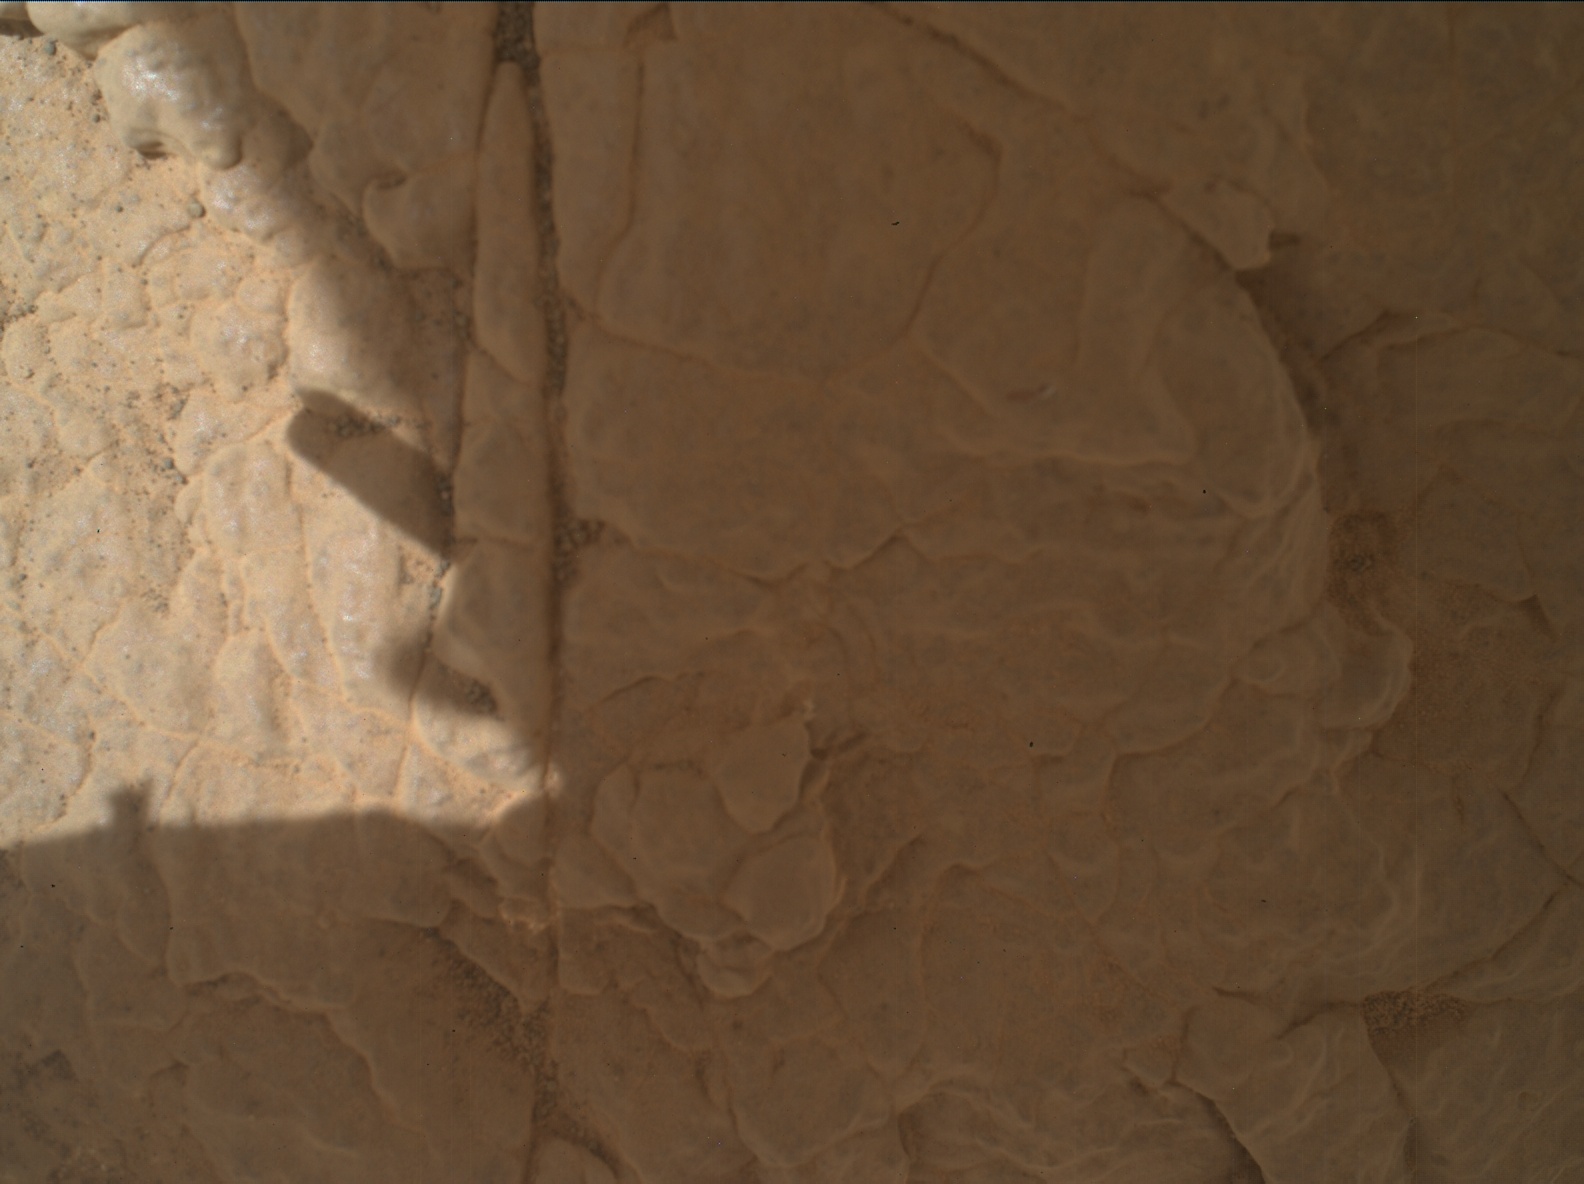 Nasa's Mars rover Curiosity acquired this image using its Mars Hand Lens Imager (MAHLI) on Sol 3007